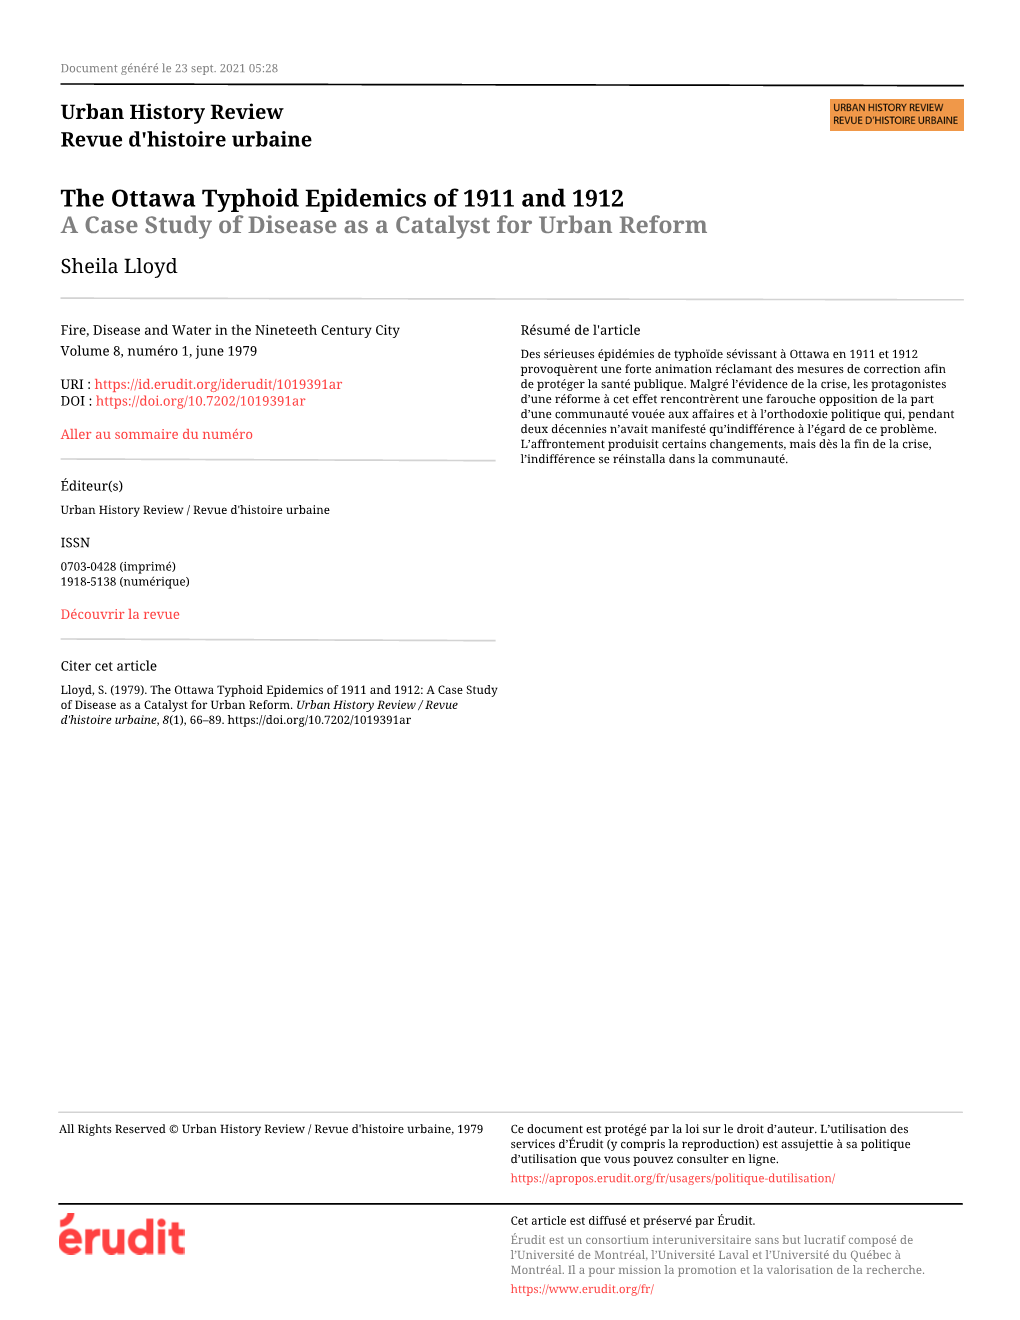 The Ottawa Typhoid Epidemics of 1911 and 1912 a Case Study of Disease As a Catalyst for Urban Reform Sheila Lloyd